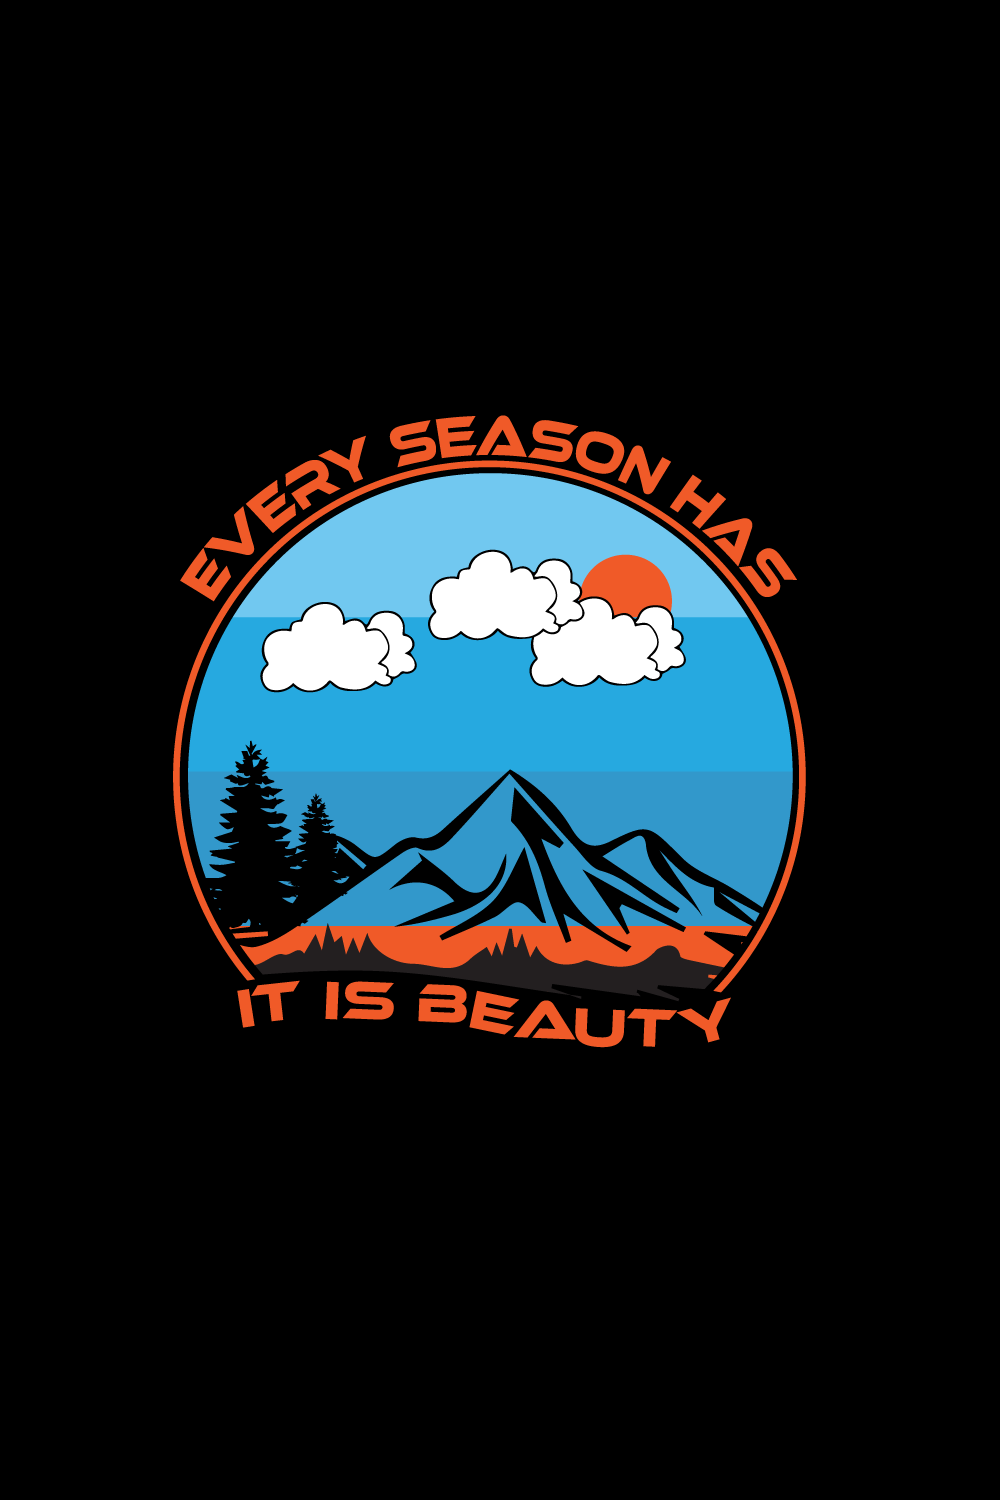 Season is beauty t-shirt design for everyone pinterest preview image.